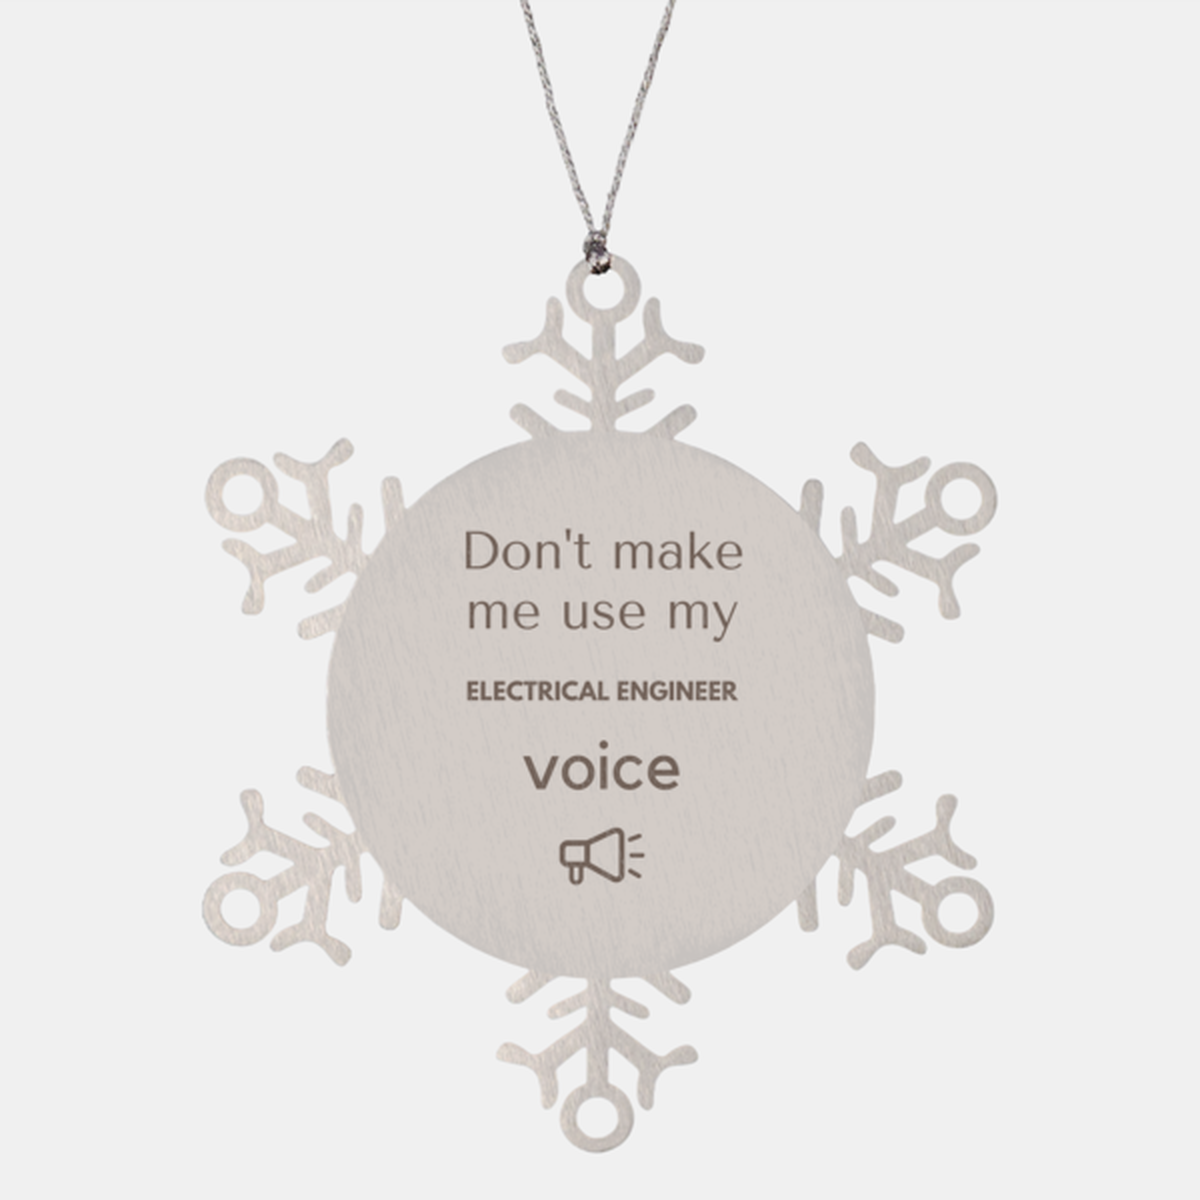 Don't make me use my Electrical Engineer voice, Sarcasm Electrical Engineer Ornament Gifts, Christmas Electrical Engineer Snowflake Ornament Unique Gifts For Electrical Engineer Coworkers, Men, Women, Colleague, Friends